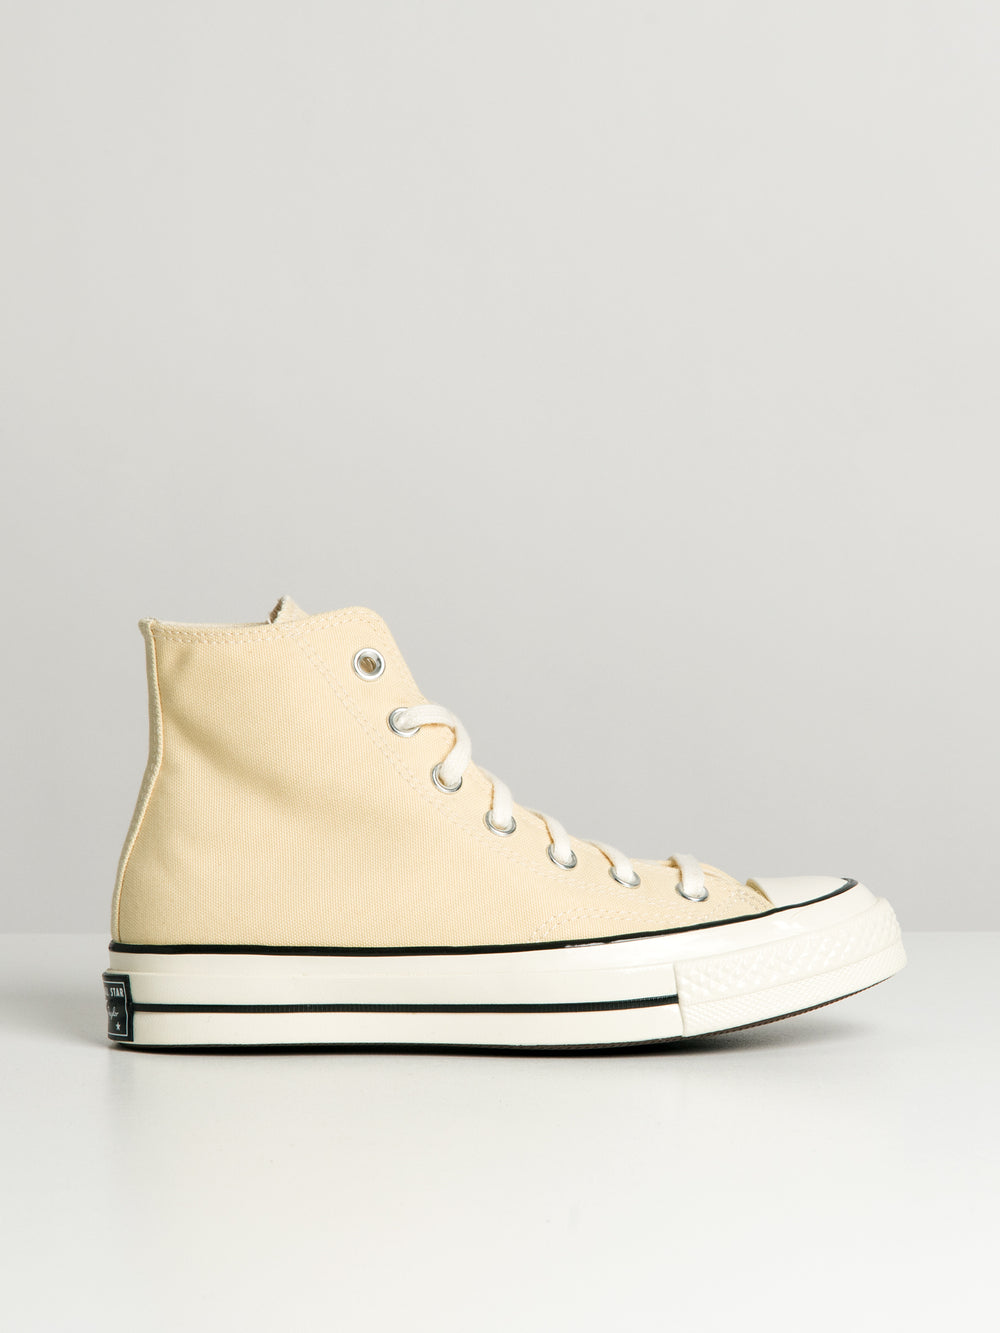 WOMENS CONVERSE CHUCK 70 NO WASTE CANVAS SNEAKER - CLEARANCE